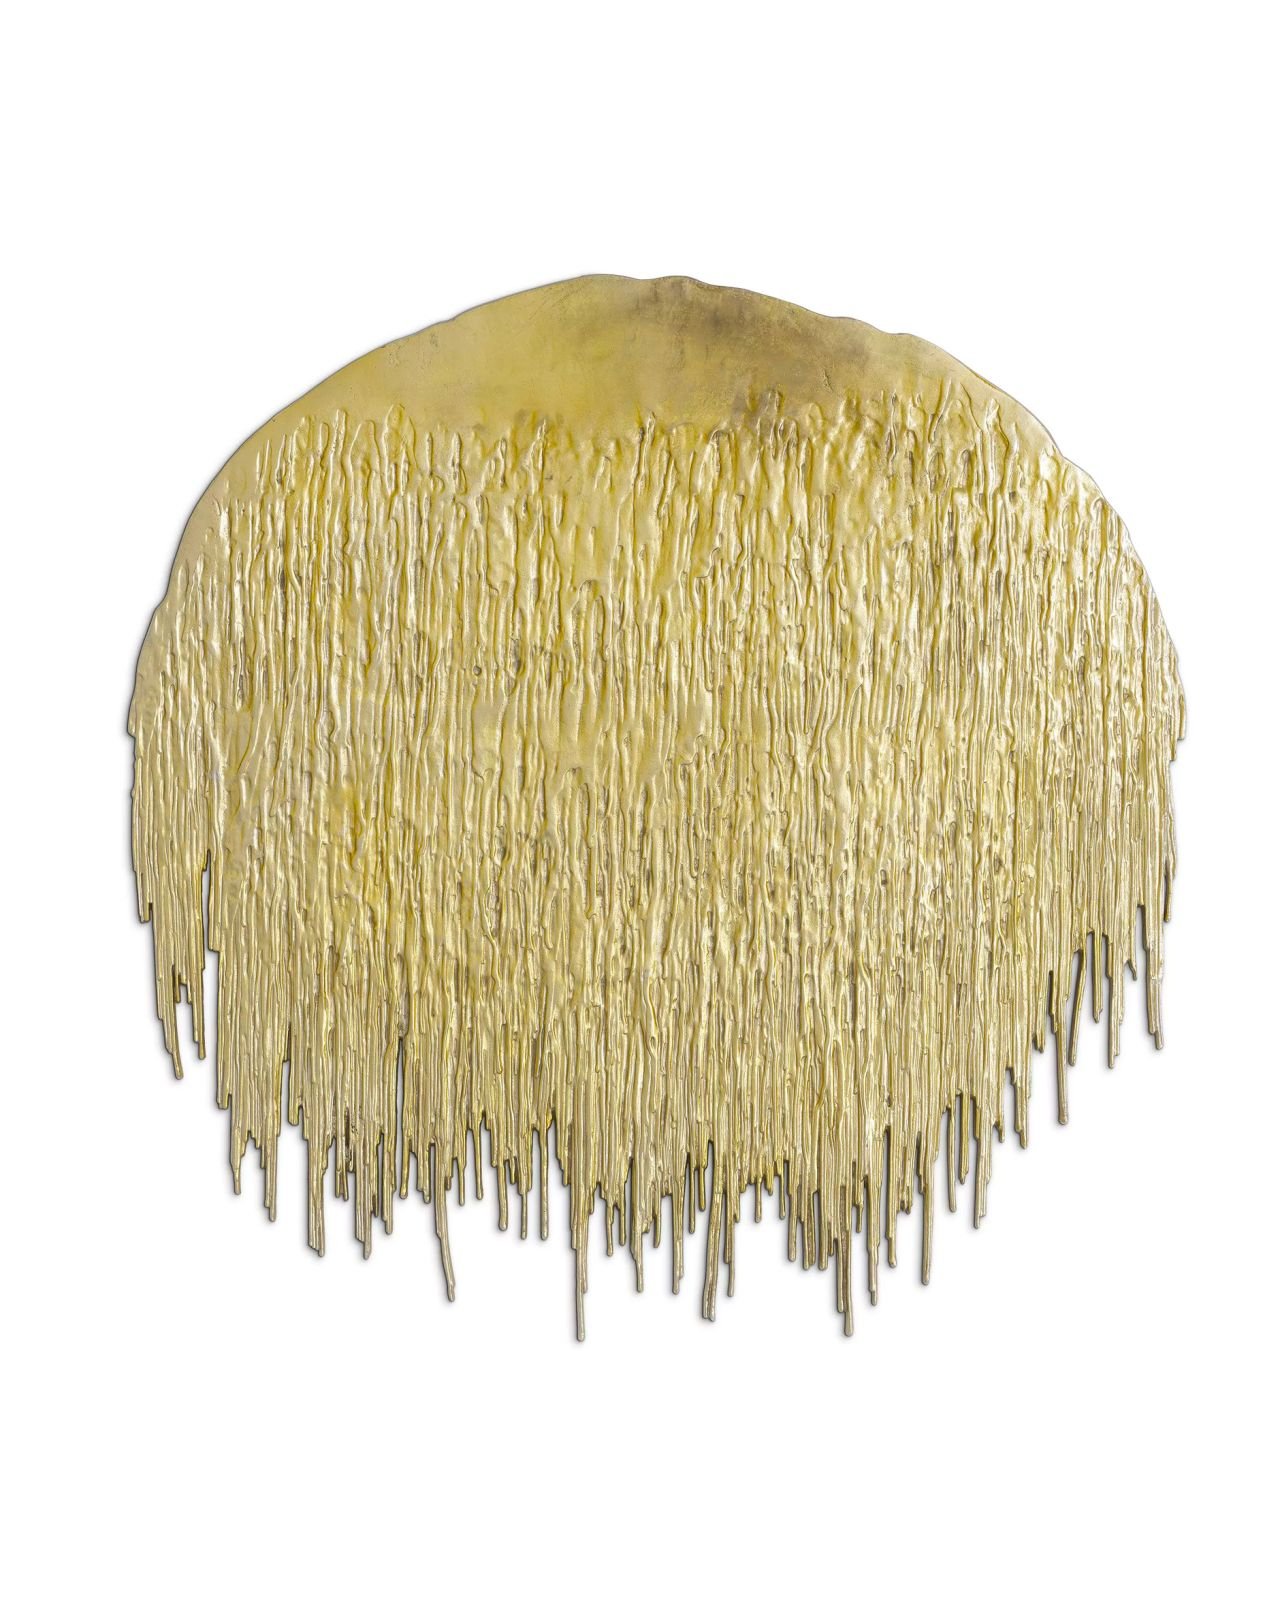 Grove wall decoration gold